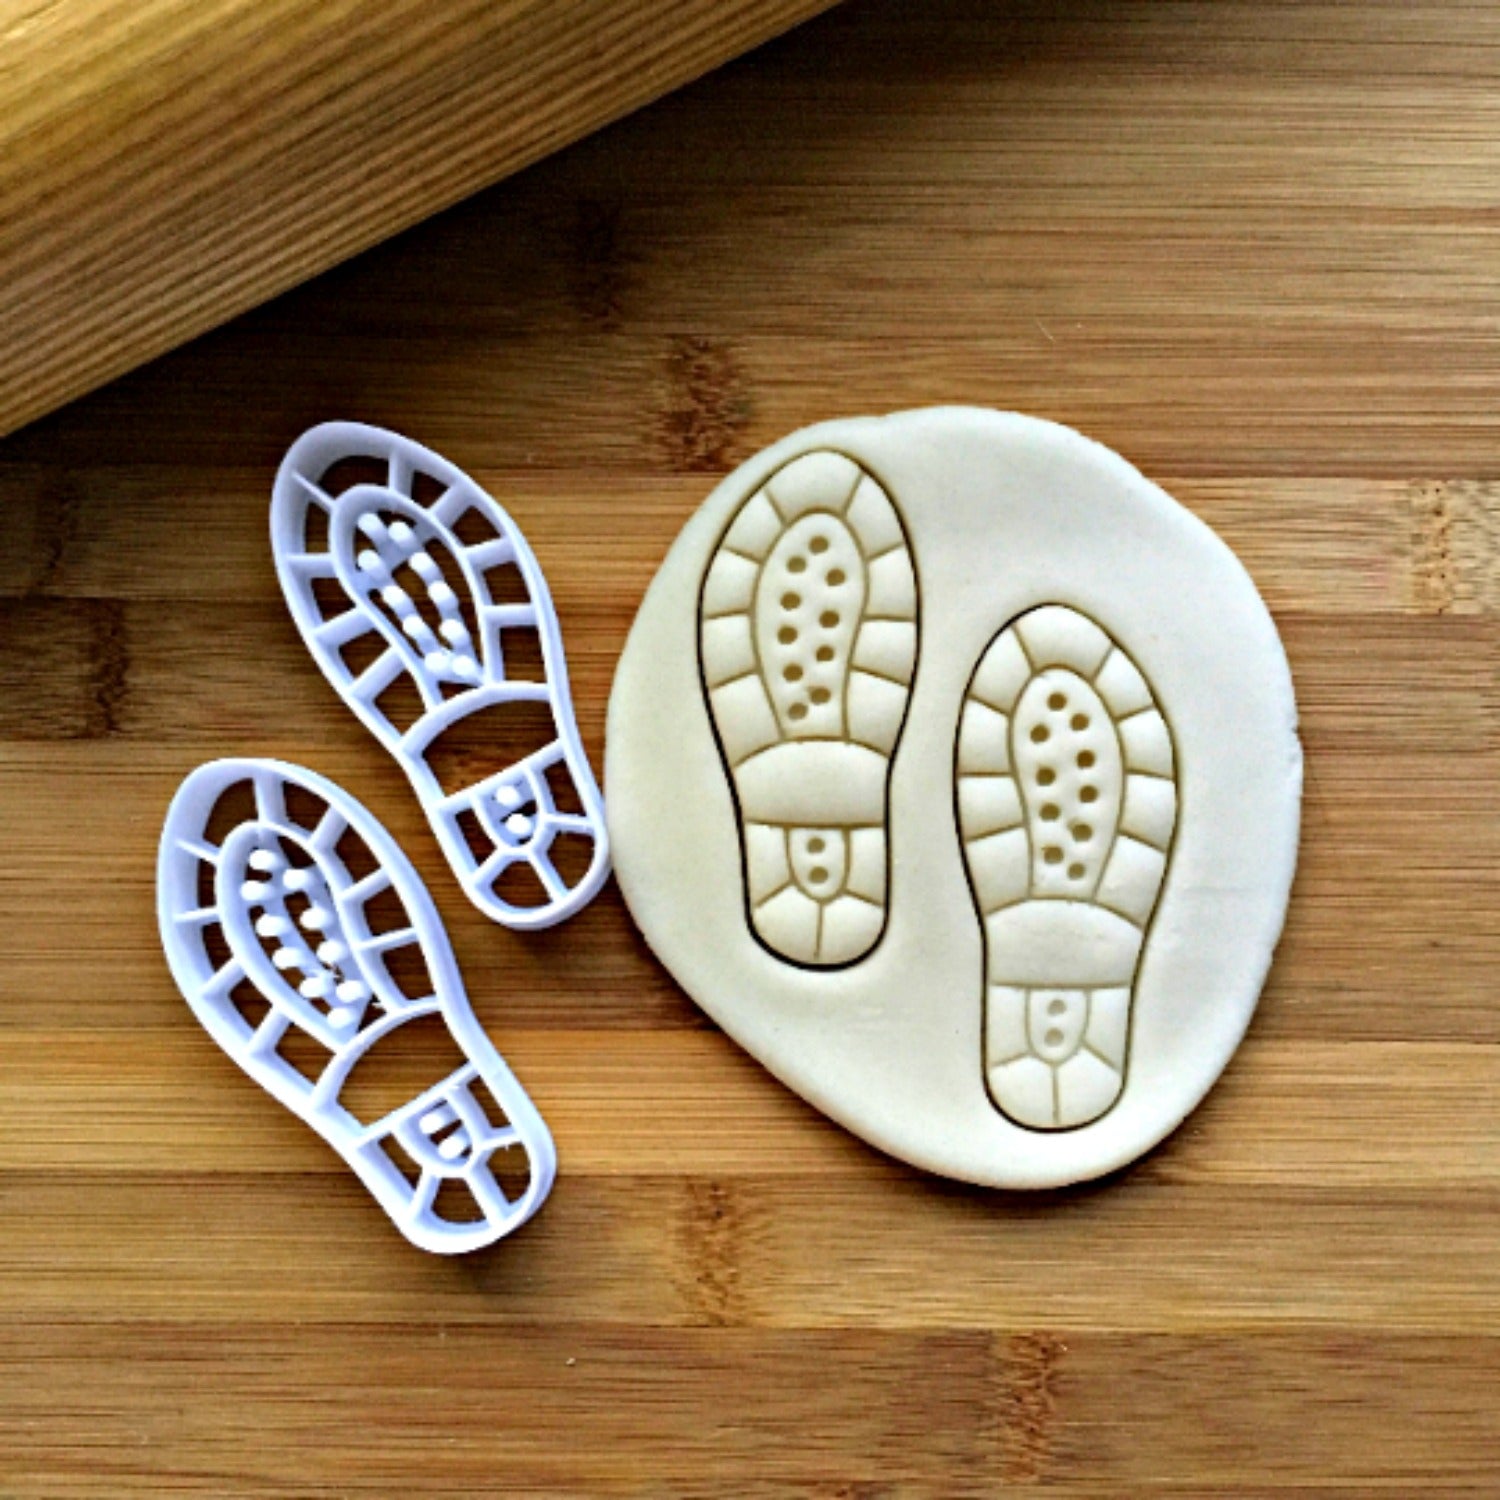 Set of 2 Shoe Print Cookie Cutters/Dishwasher Safe